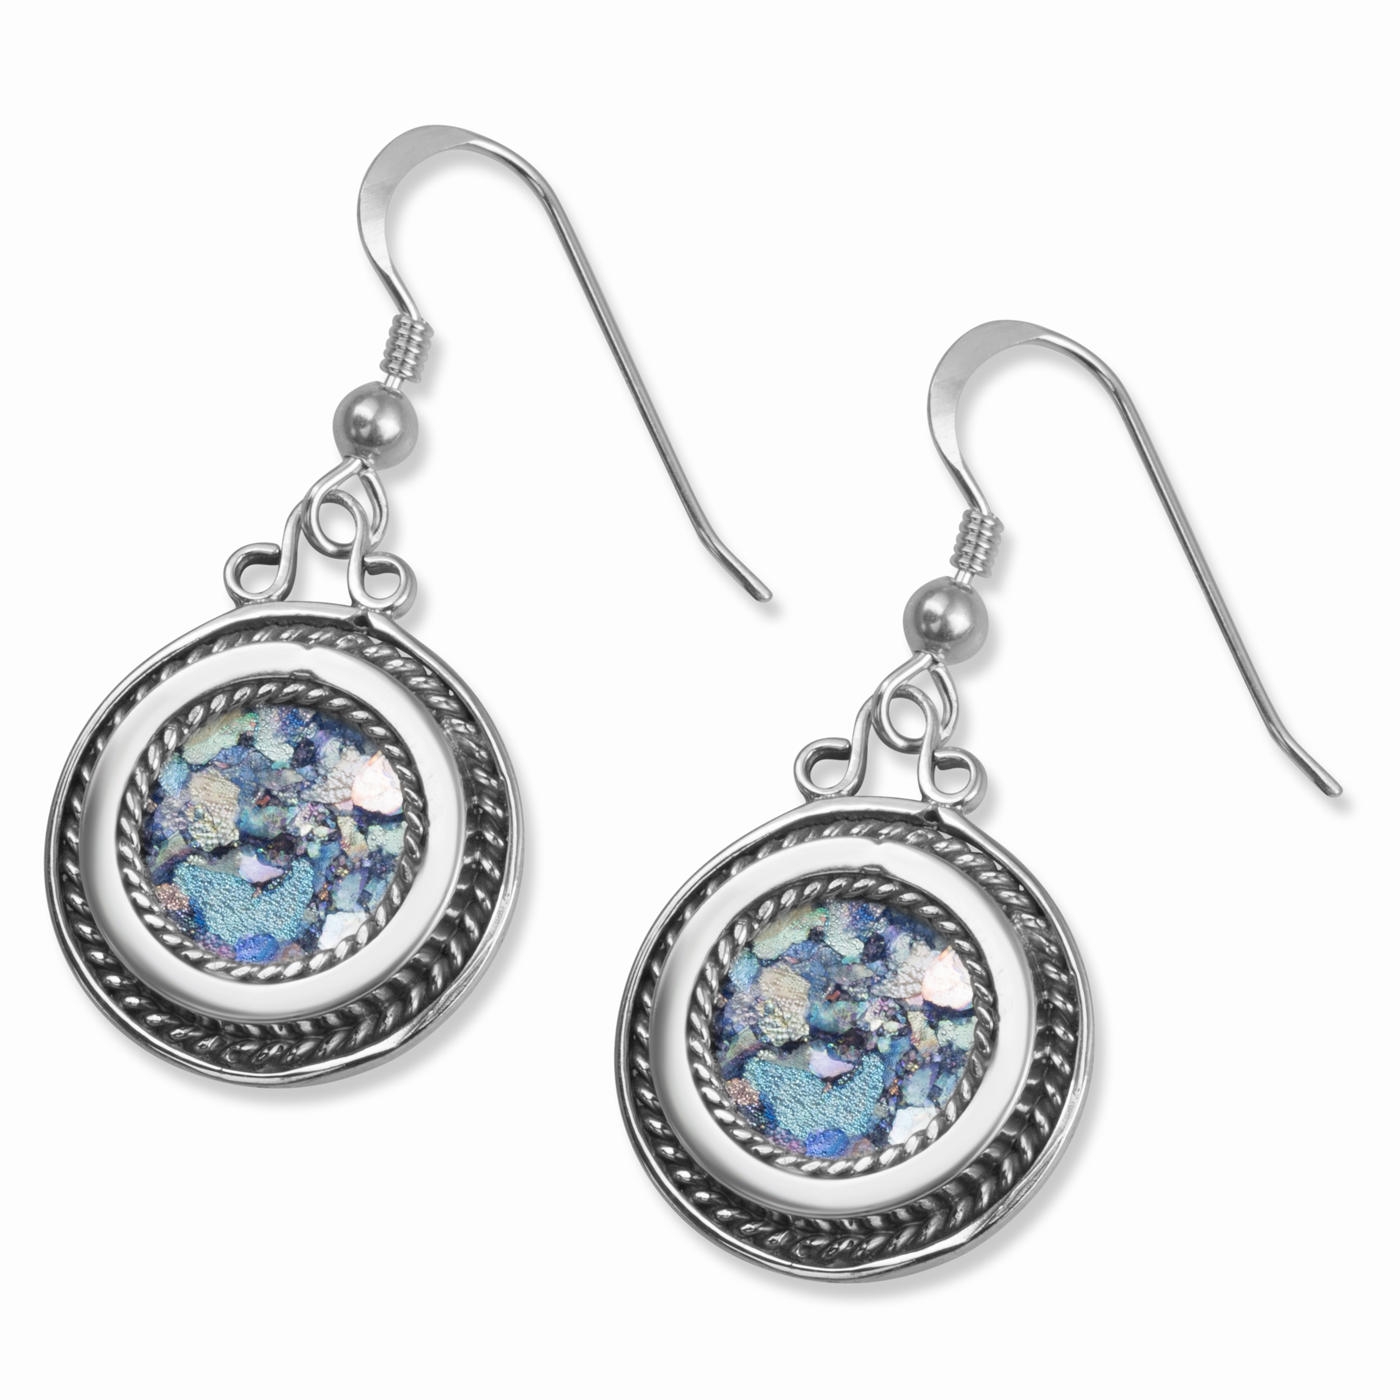 925 Sterling Silver and Roman Glass Circle Earrings with Filigree Frame - 1